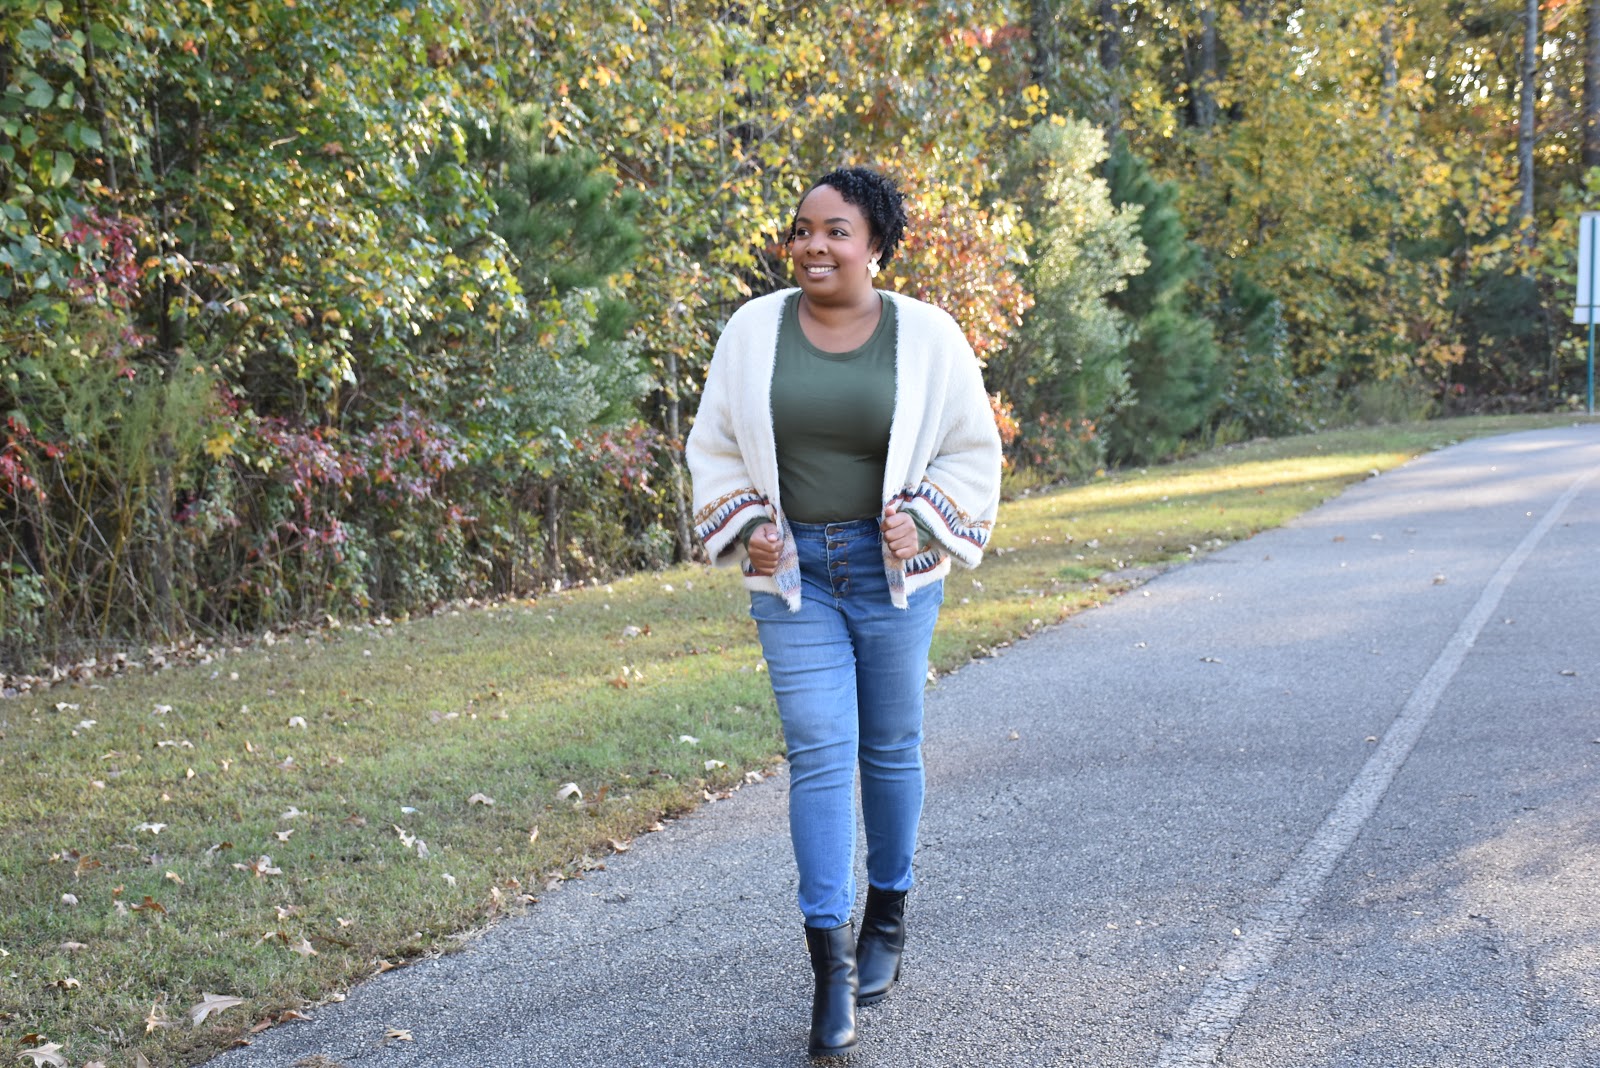 a.n.a. Eyelash Cardigan with Tee, Jegging, and Boots from JCPenney